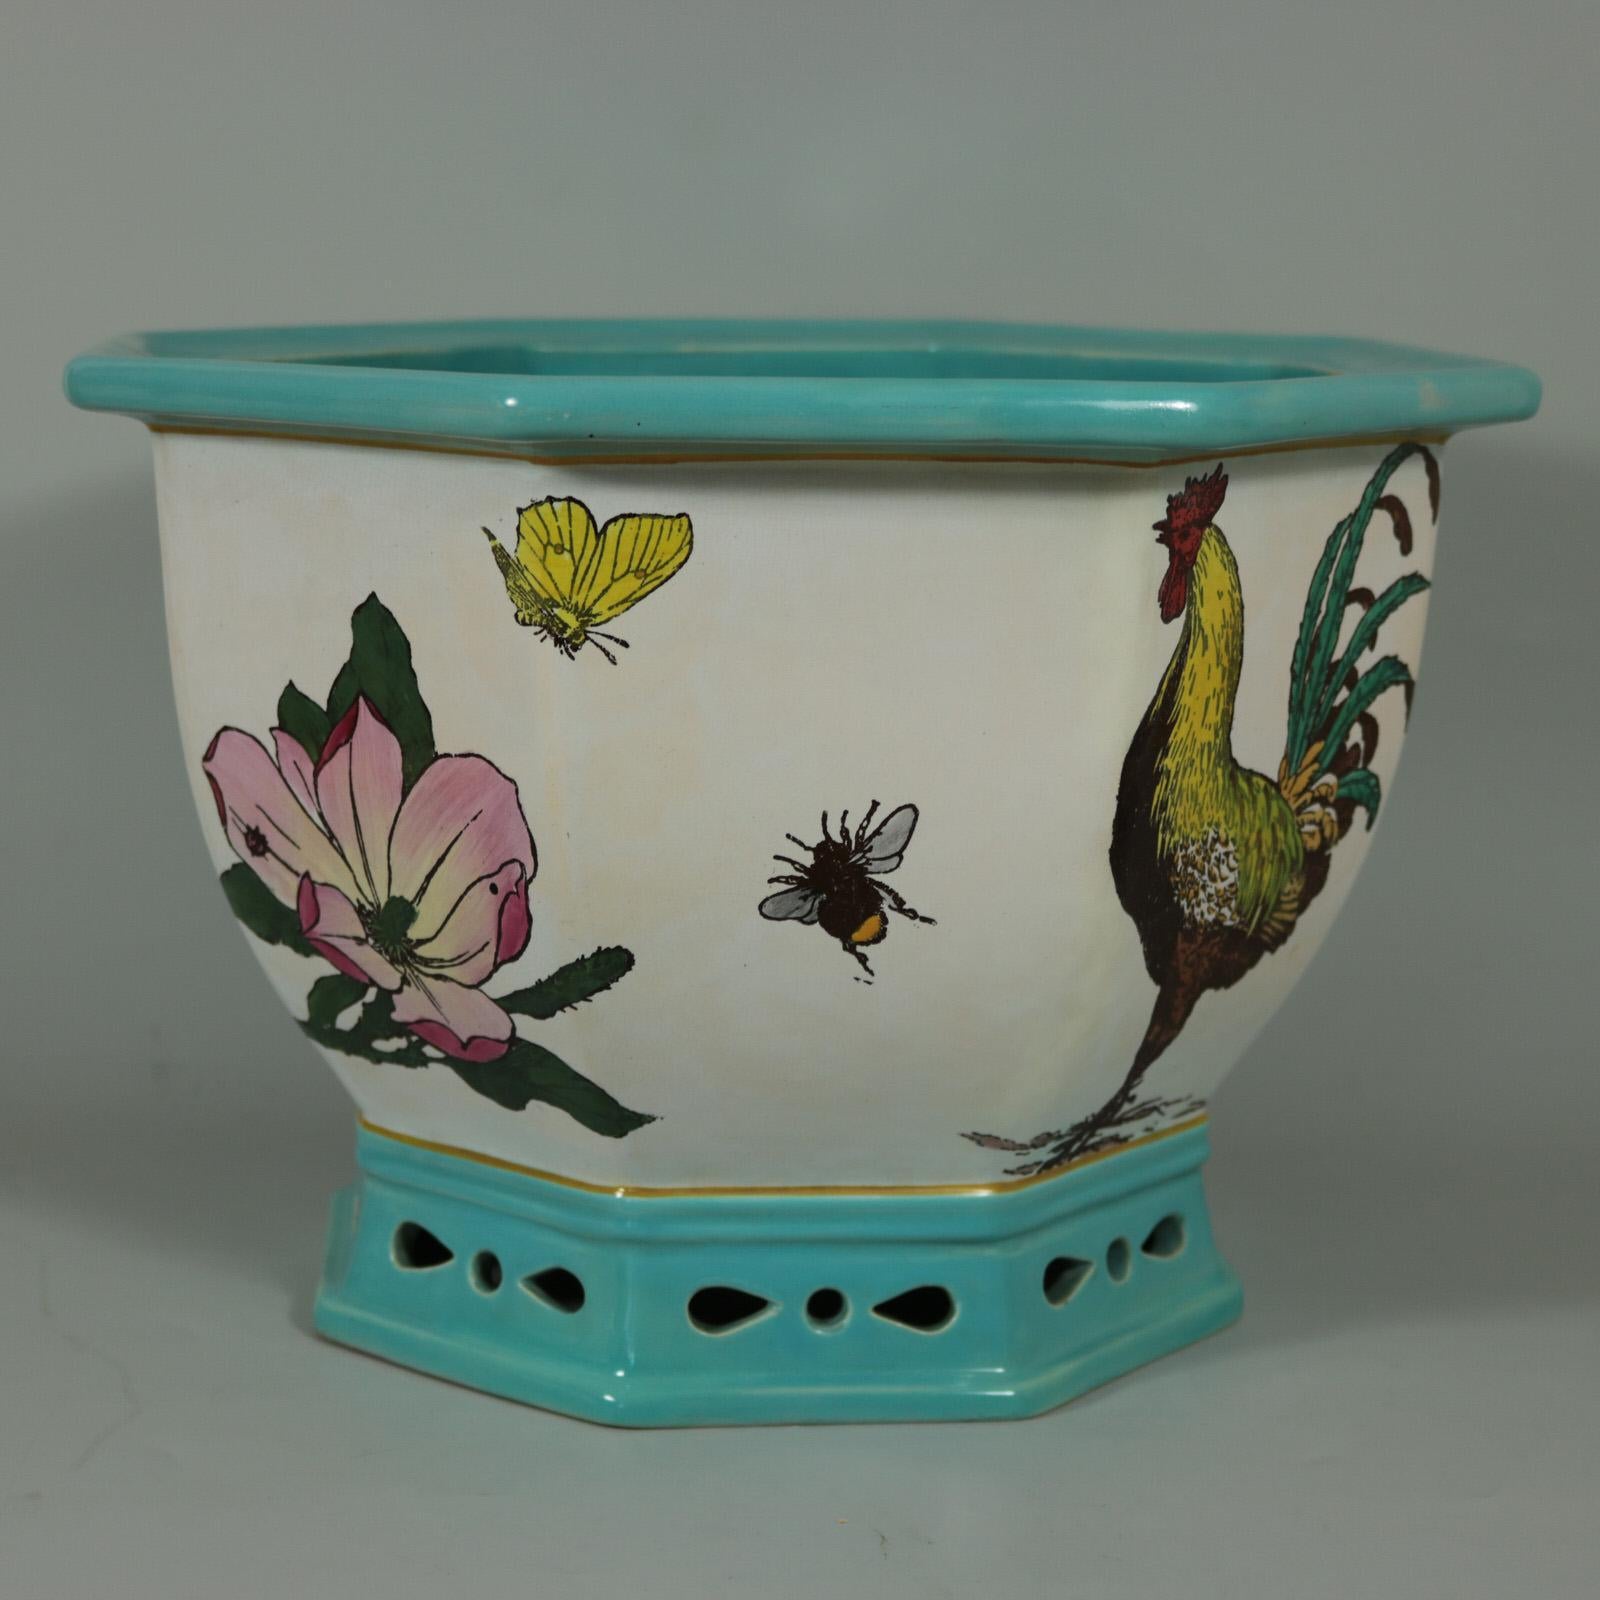 19th Century Minton Majolica 'Naturalist' Jardiniere by W.S Coleman For Sale